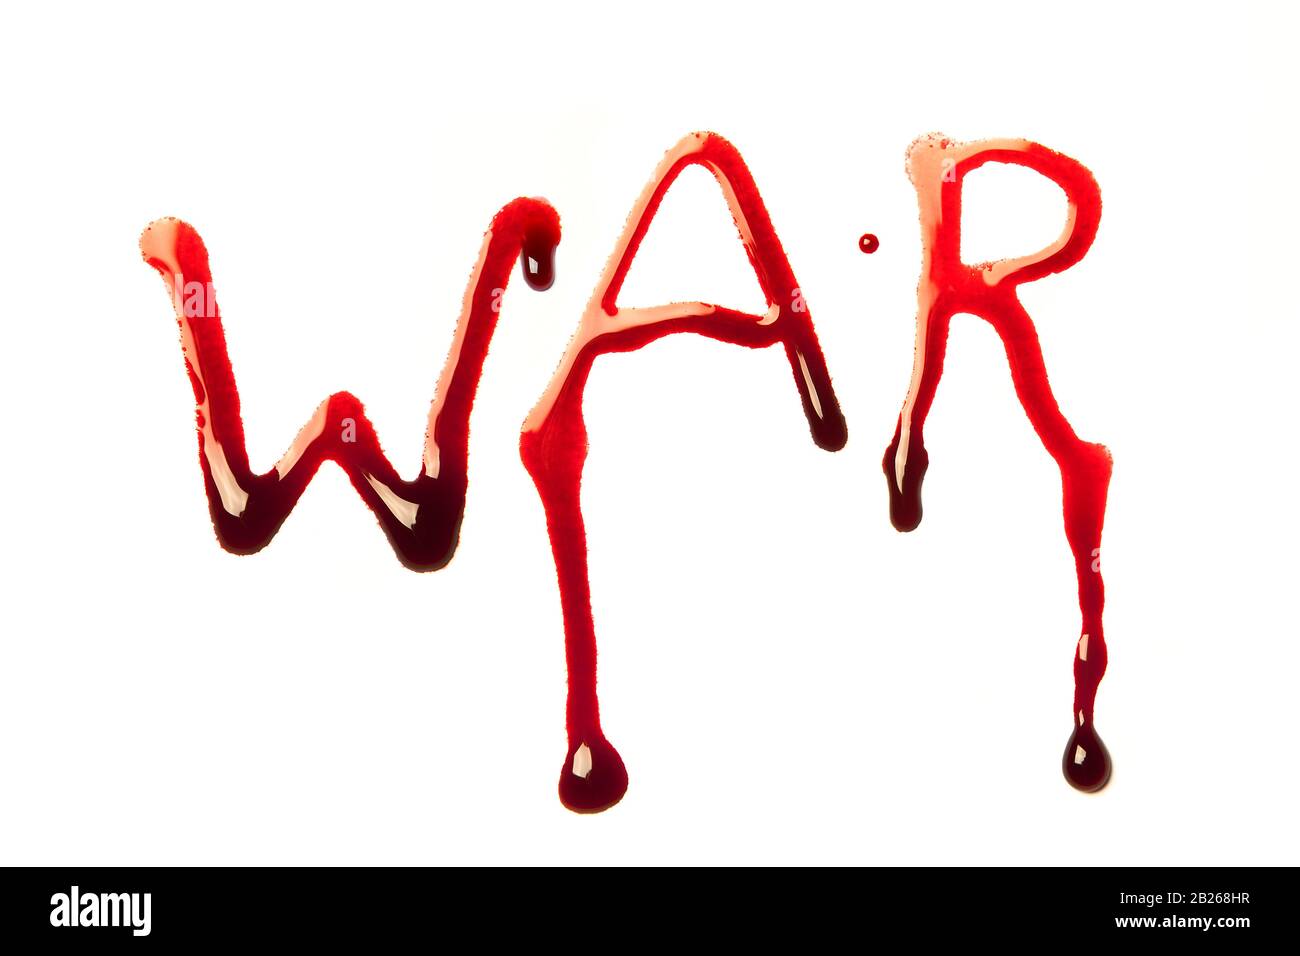 Word war written in bloody red letters Stock Photo